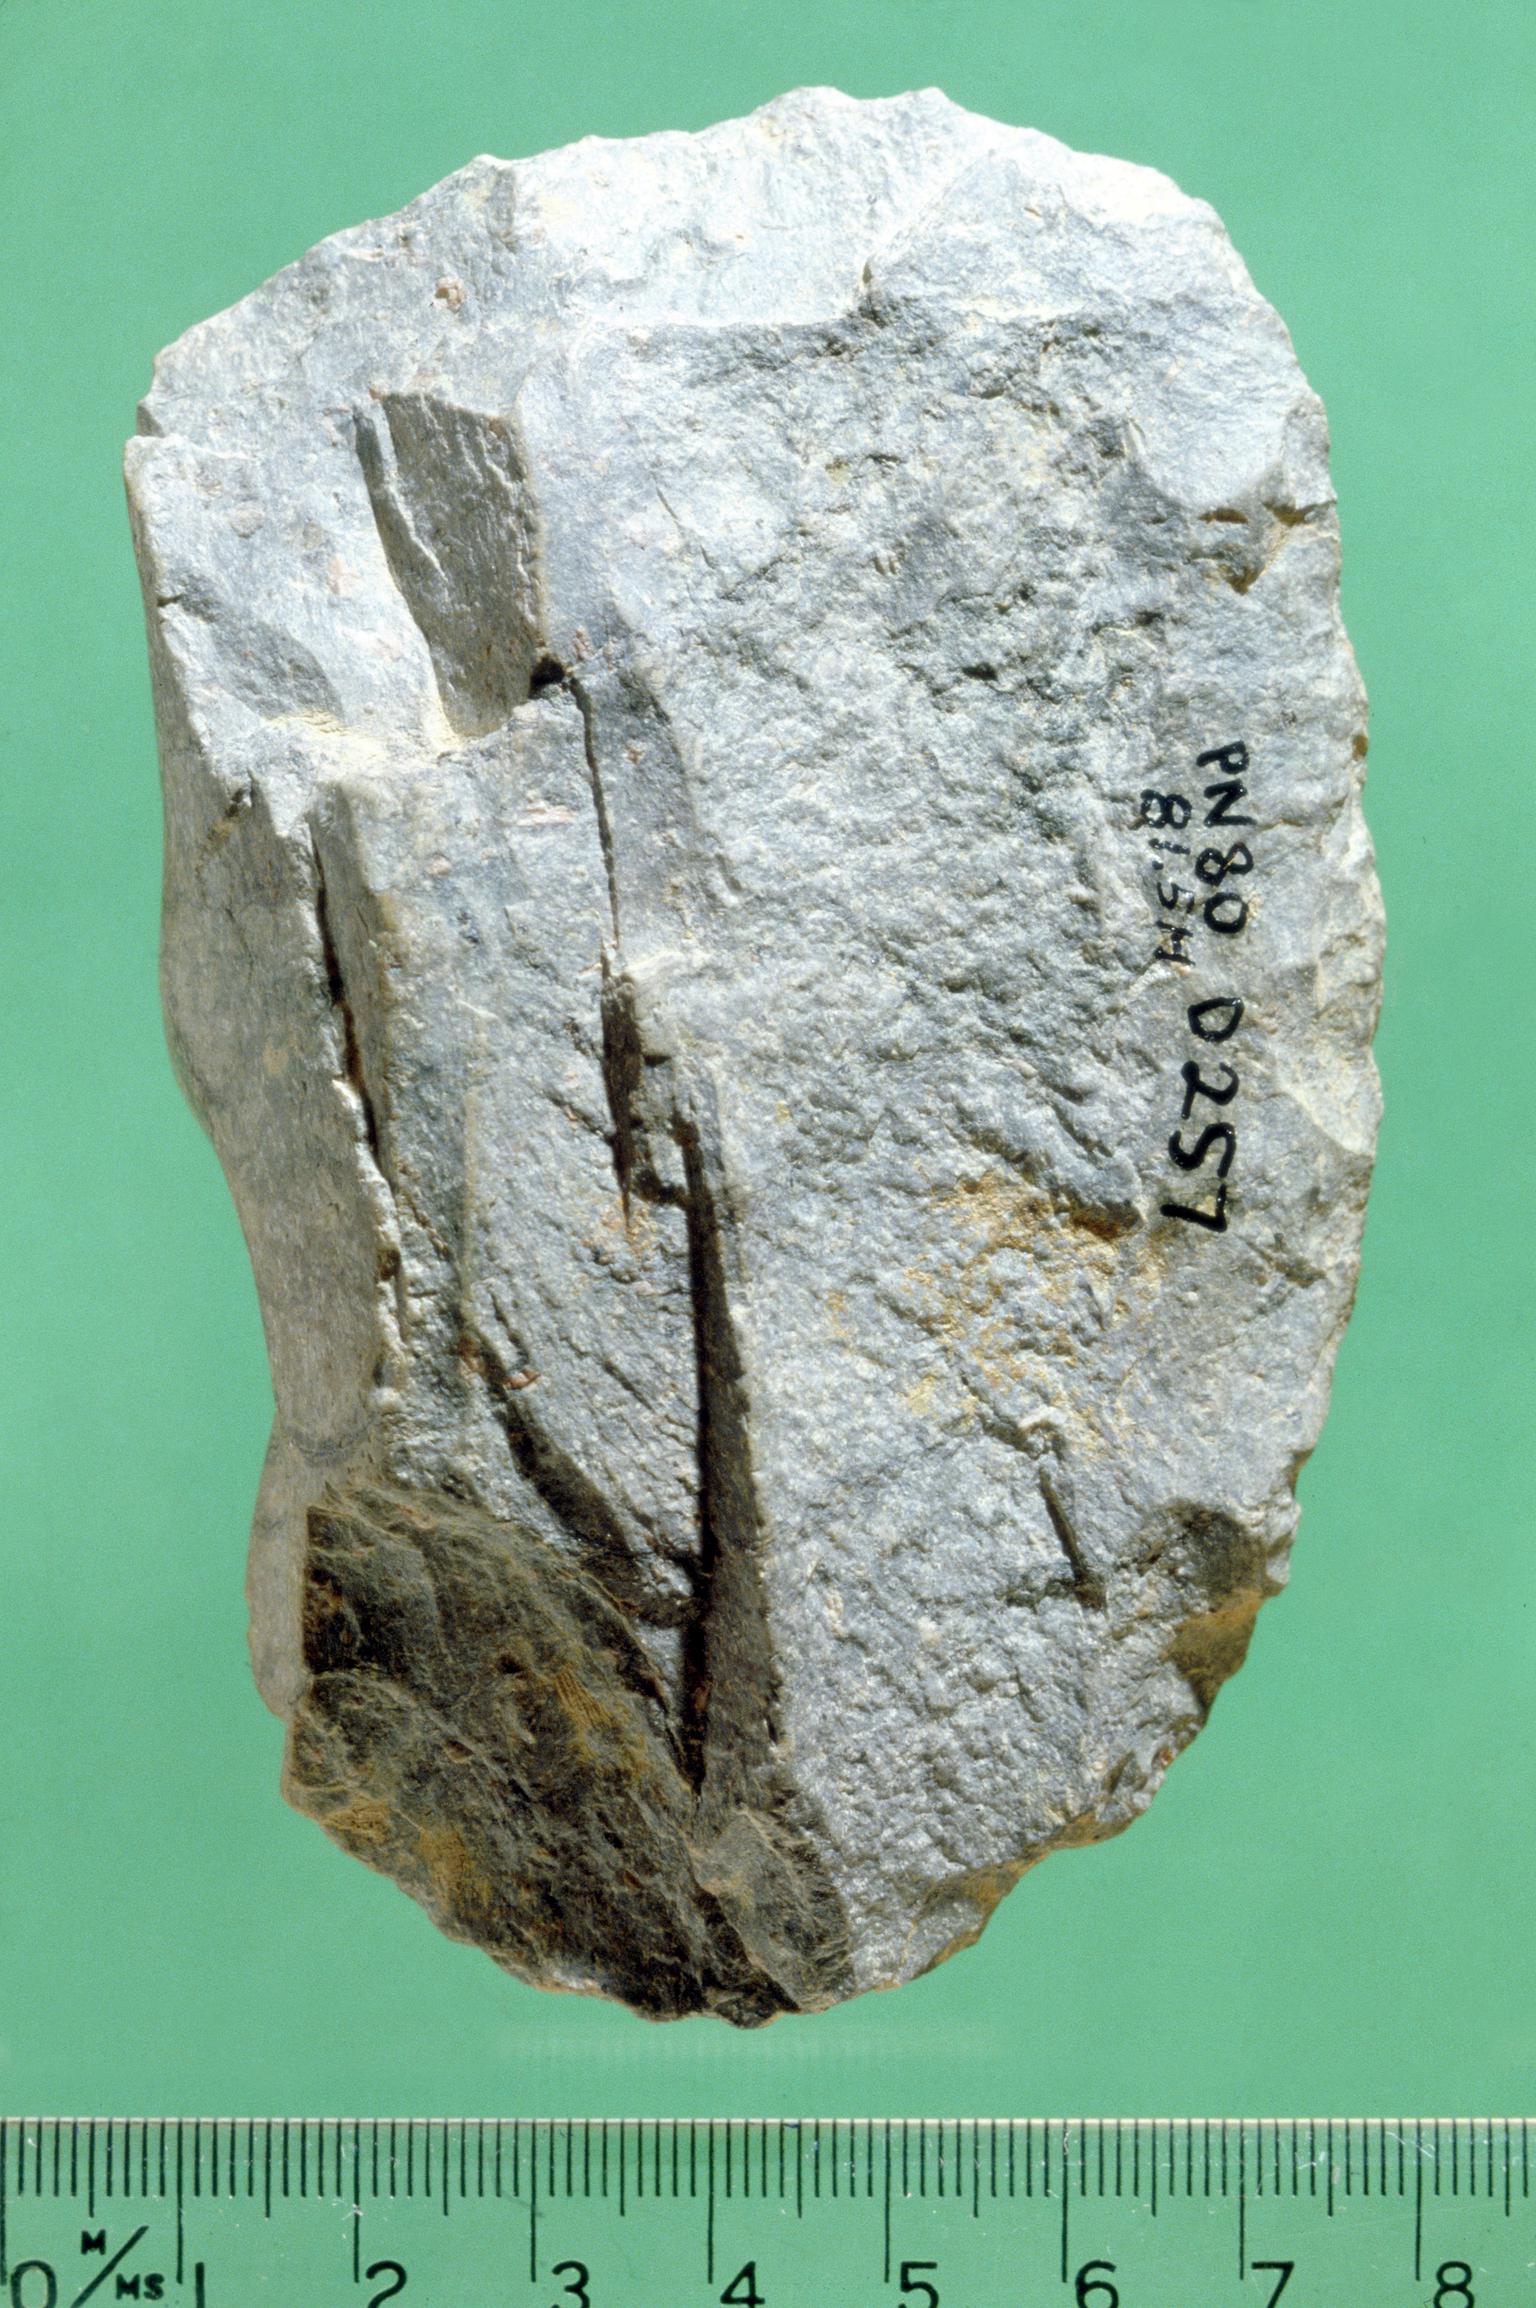 Lower Palaeolithic stone cleaver